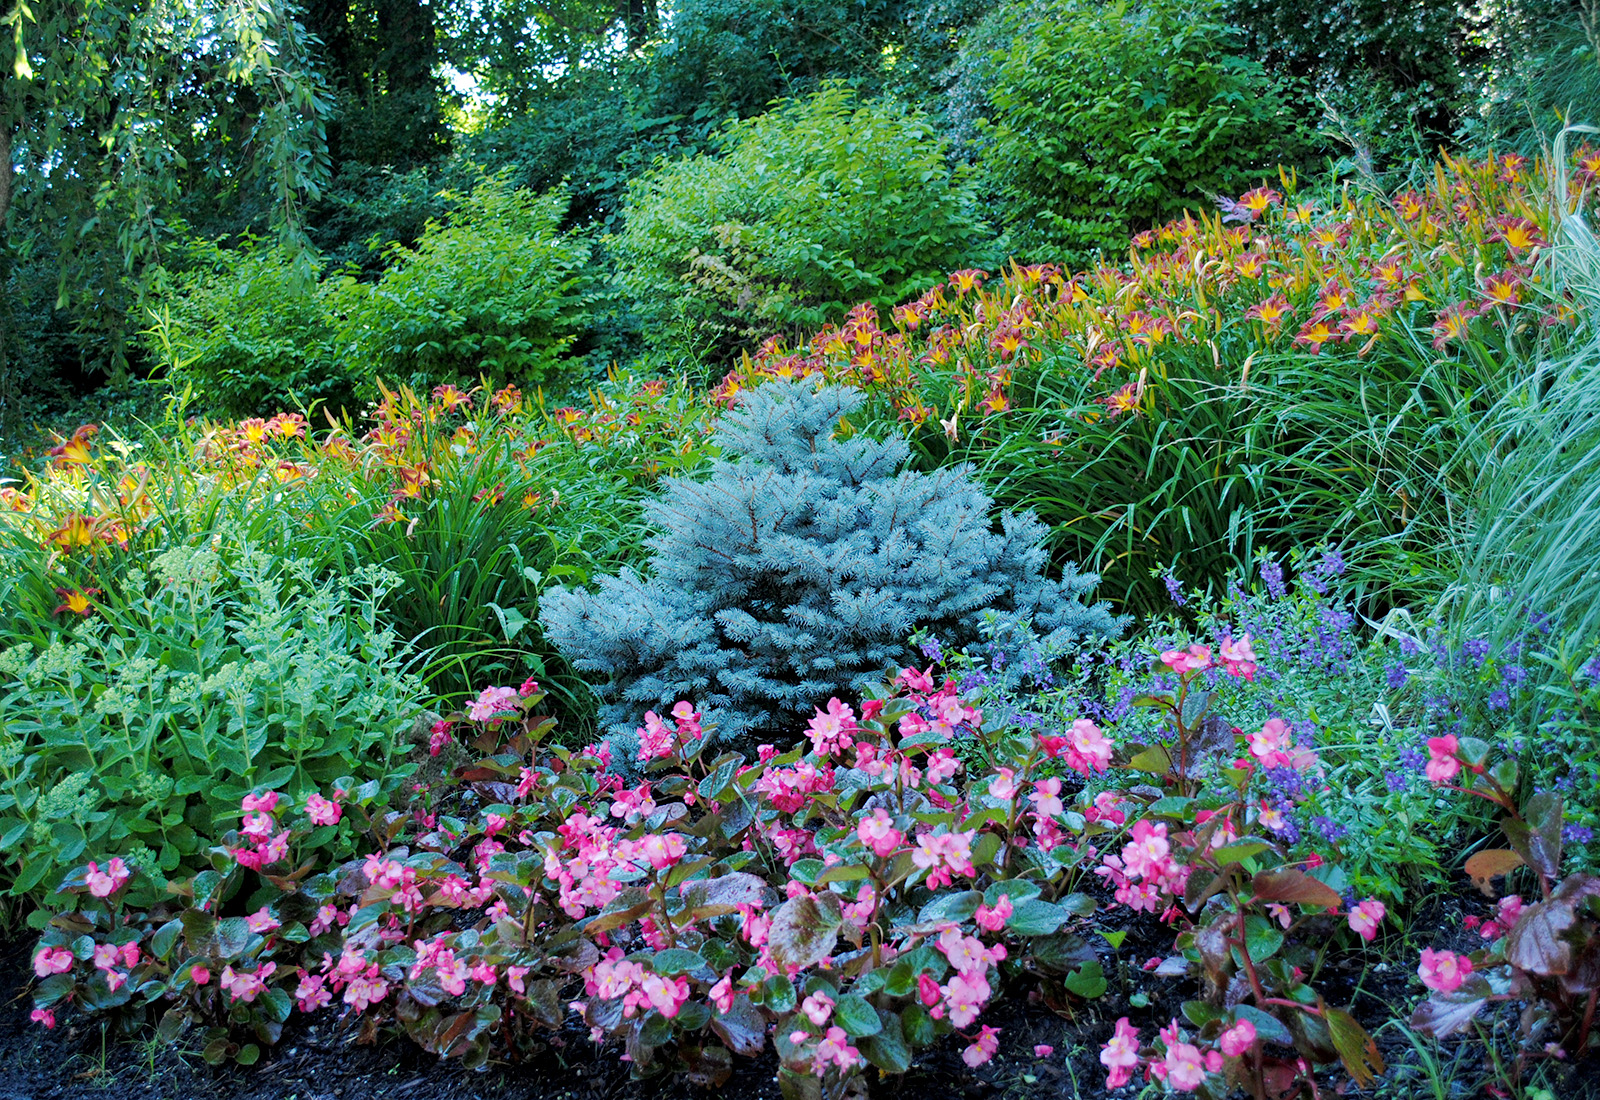 Natural planting design with annuals, perennials and shrubbery.